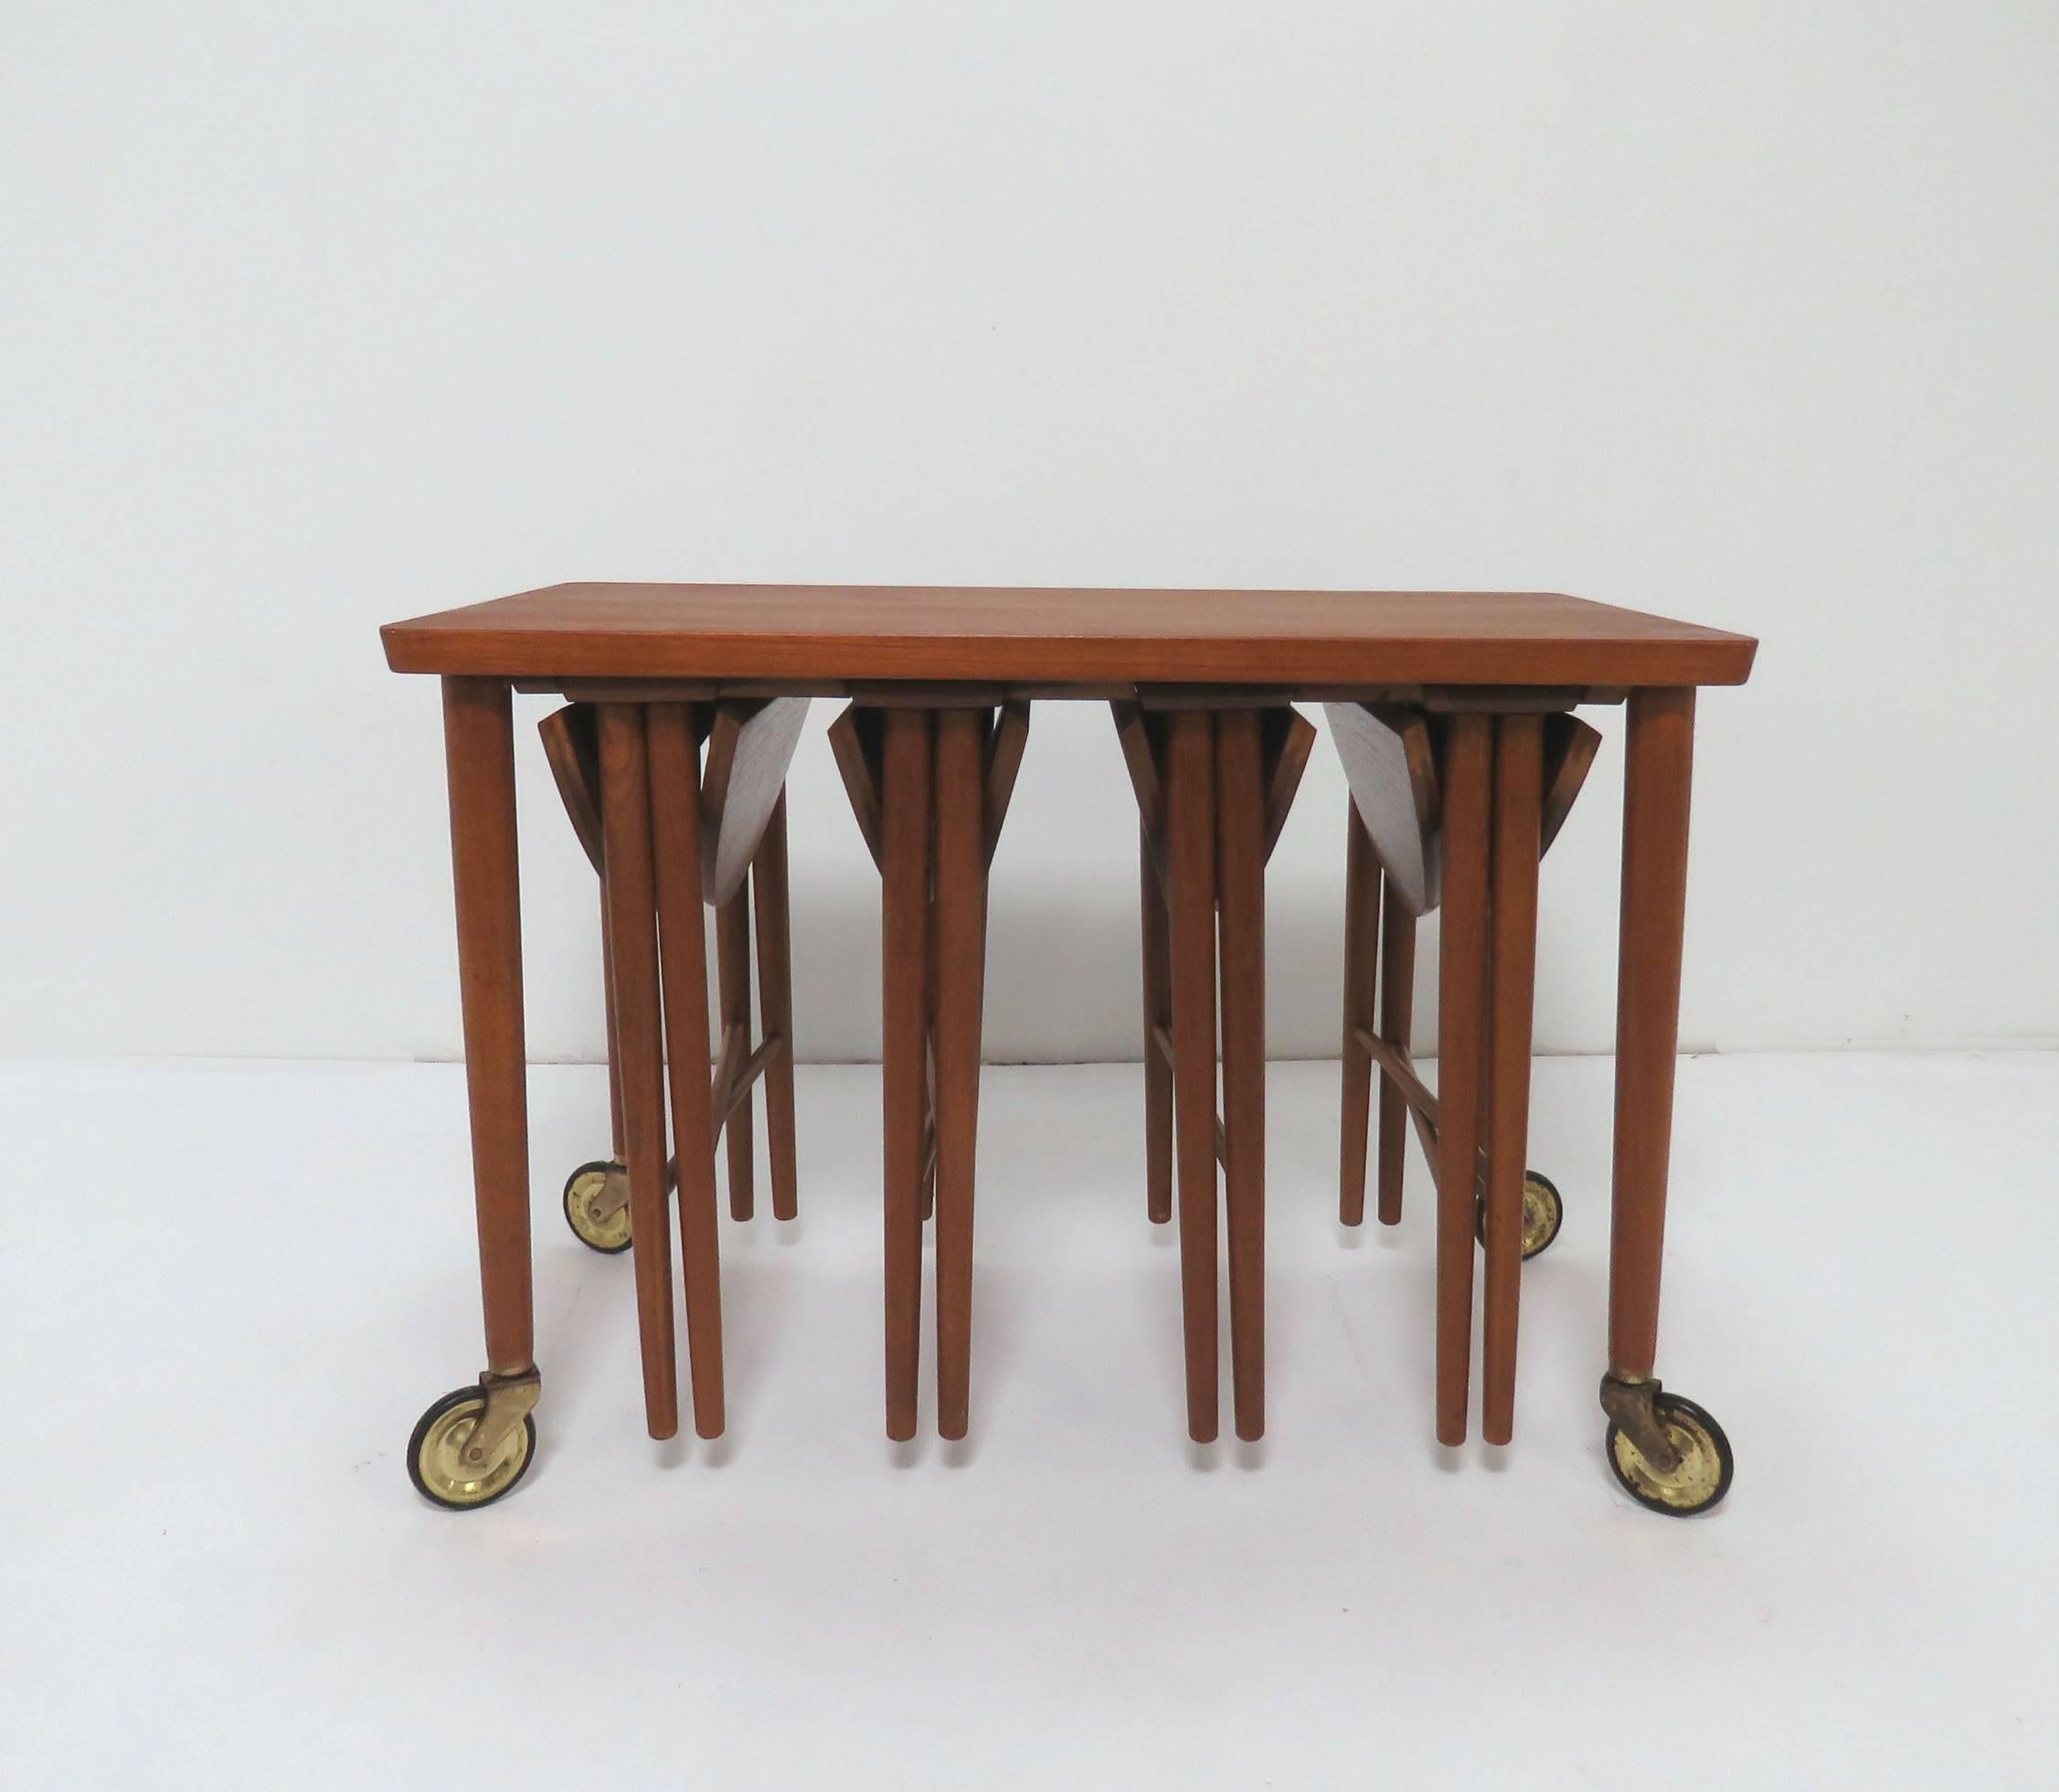 Set of Danish teak nesting tables, consisting of four folding tables that secure to the under side of a larger serving trolley on casters. By Bent Hundevad for Hundevad and Co., made in Denmark, circa 1960s.

The folding tables measure 15 1/8